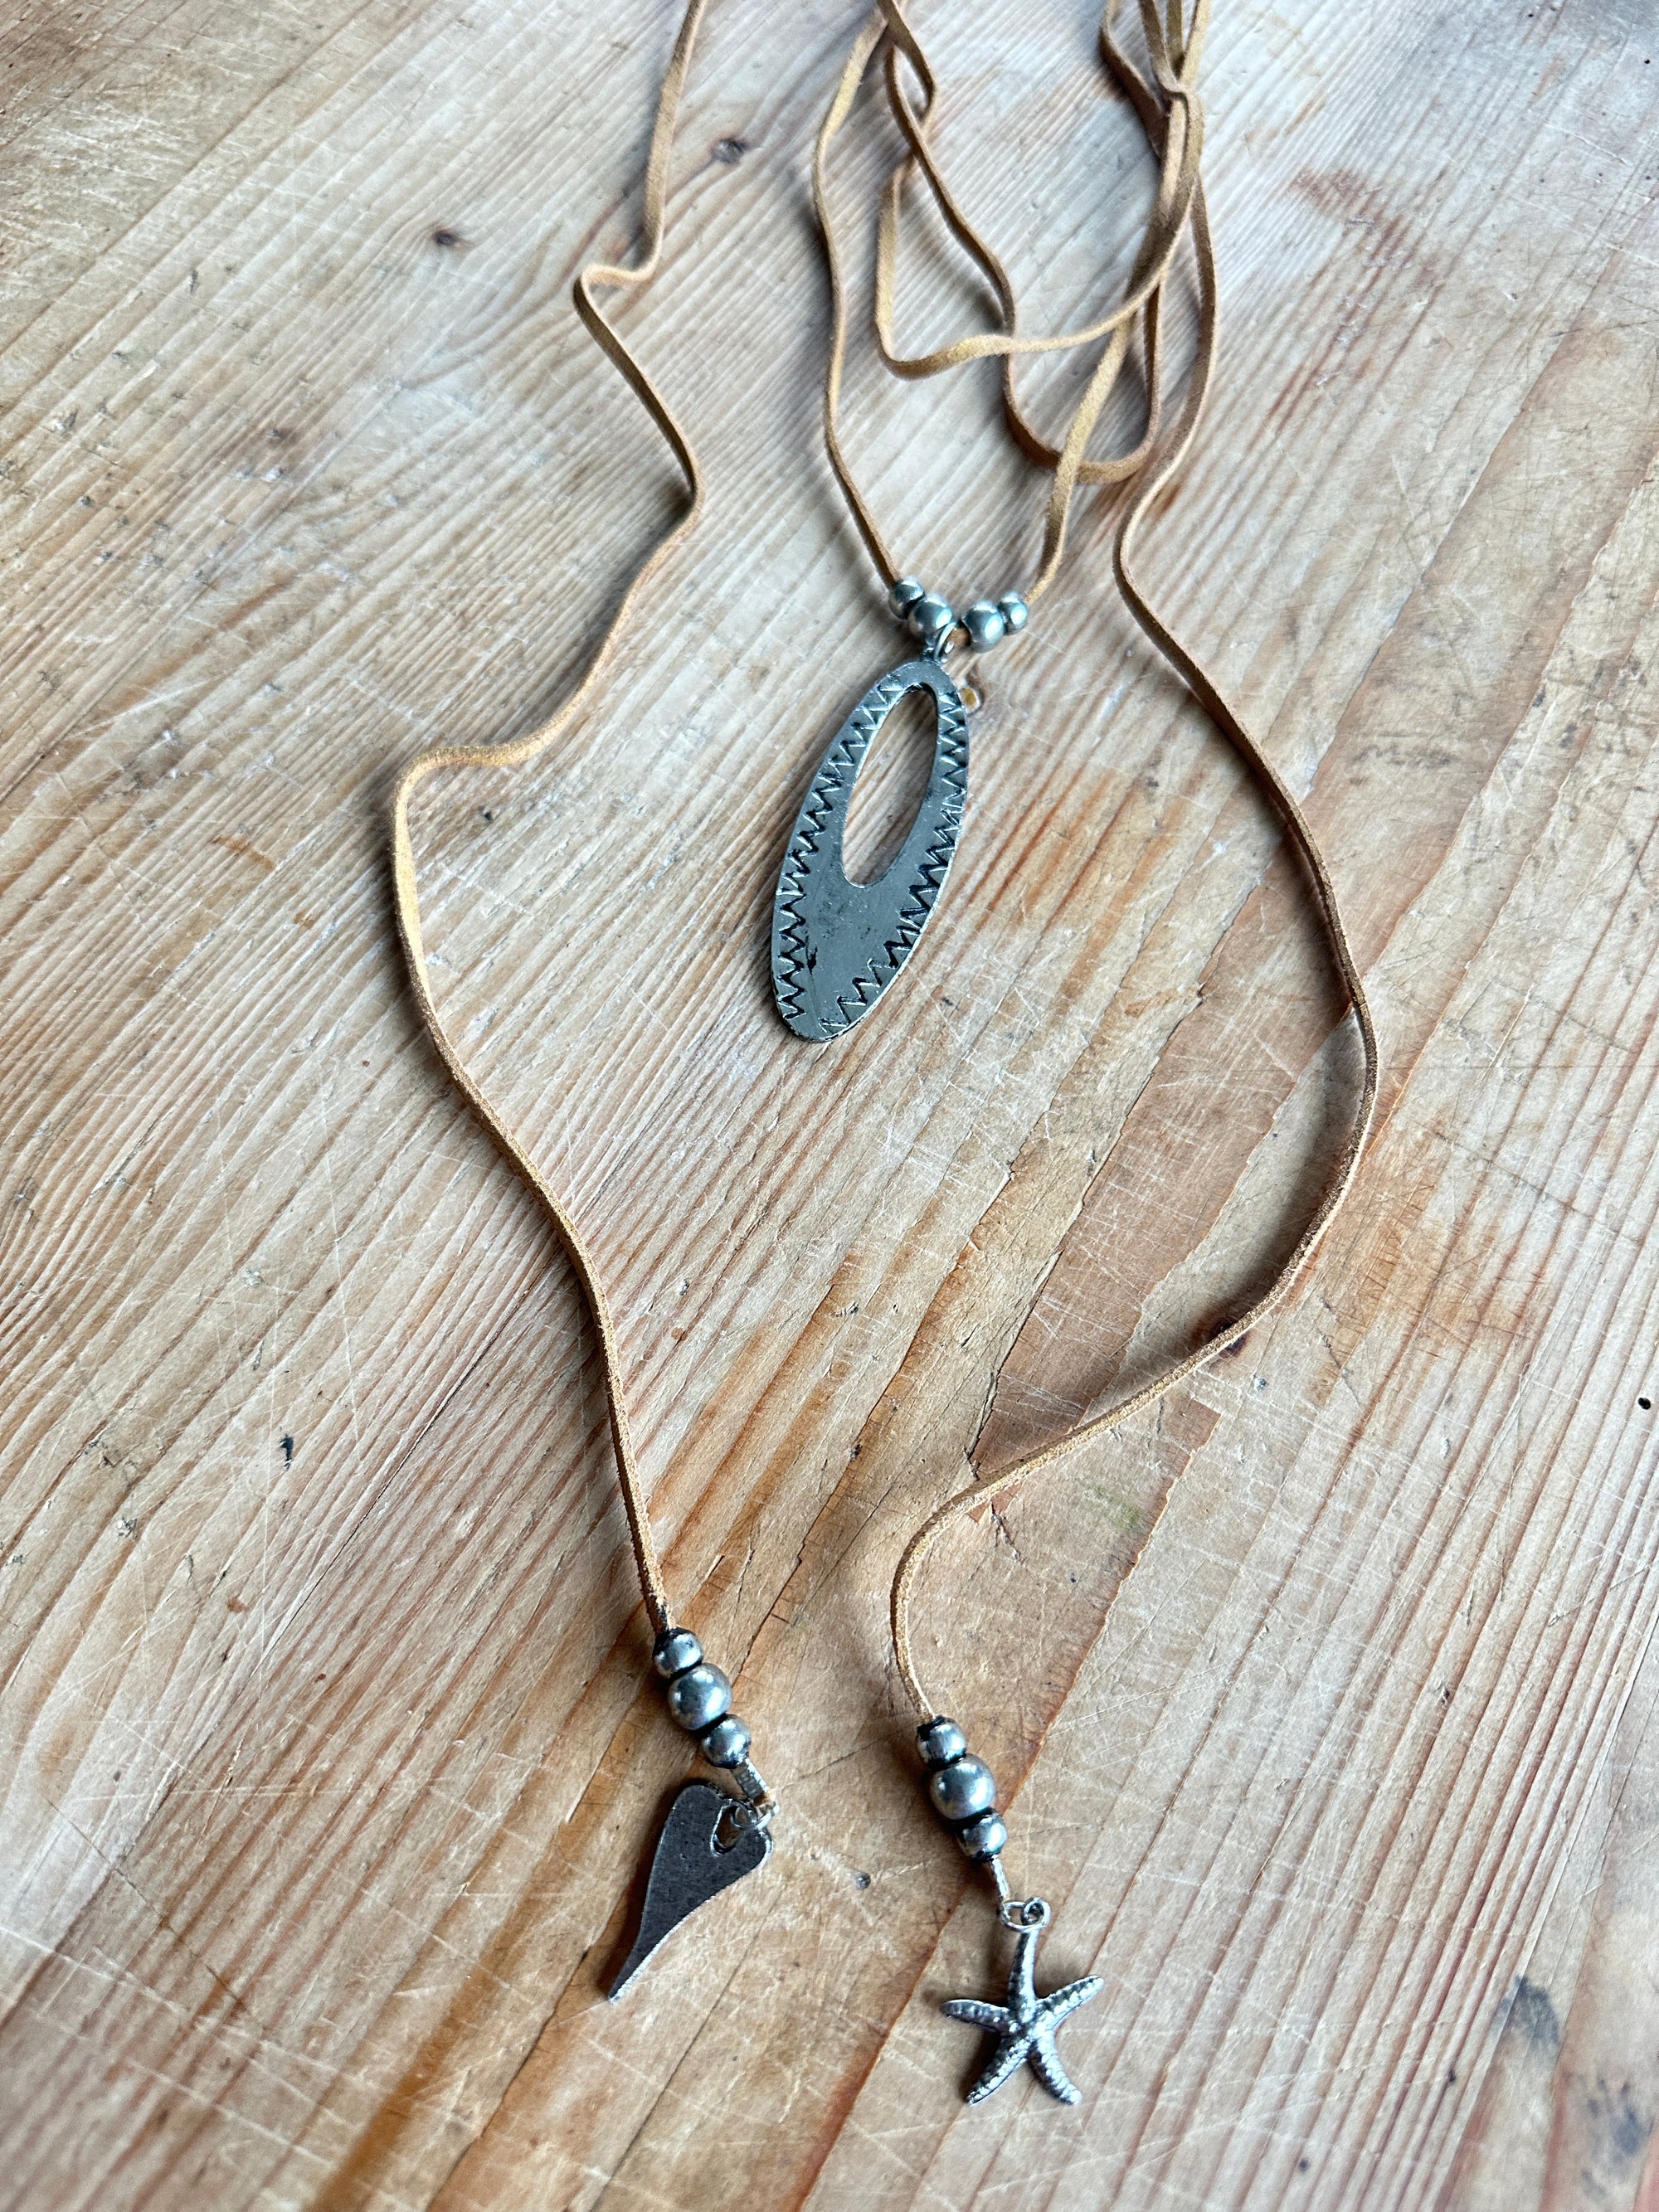 Oval on Tan Leather Necklace